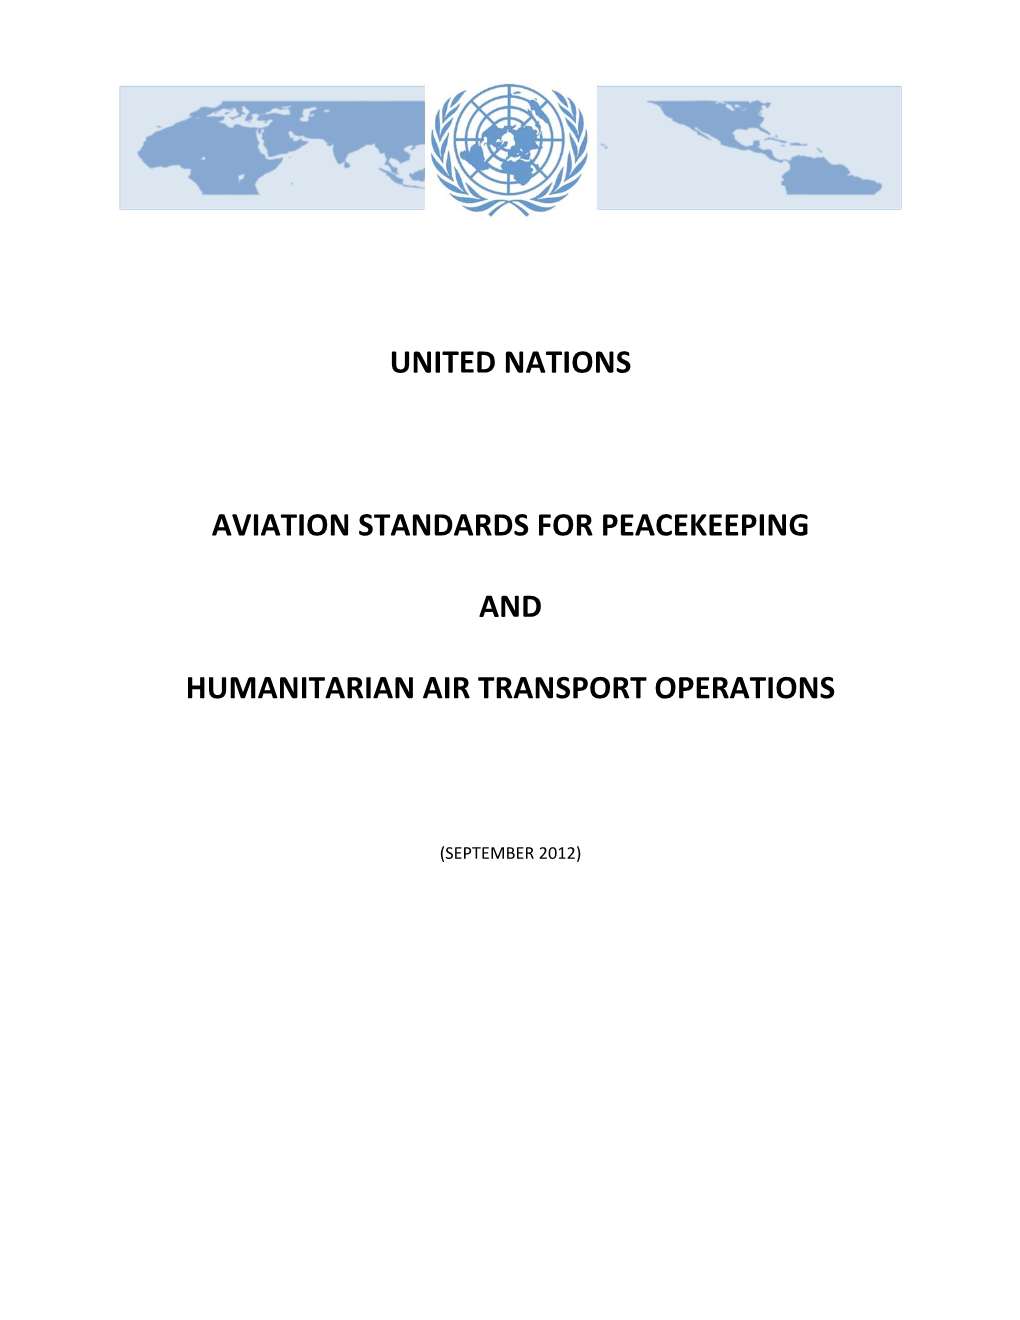 United Nations Aviation Standards for Peacekeeping and Humanitarian Air Transport Operations